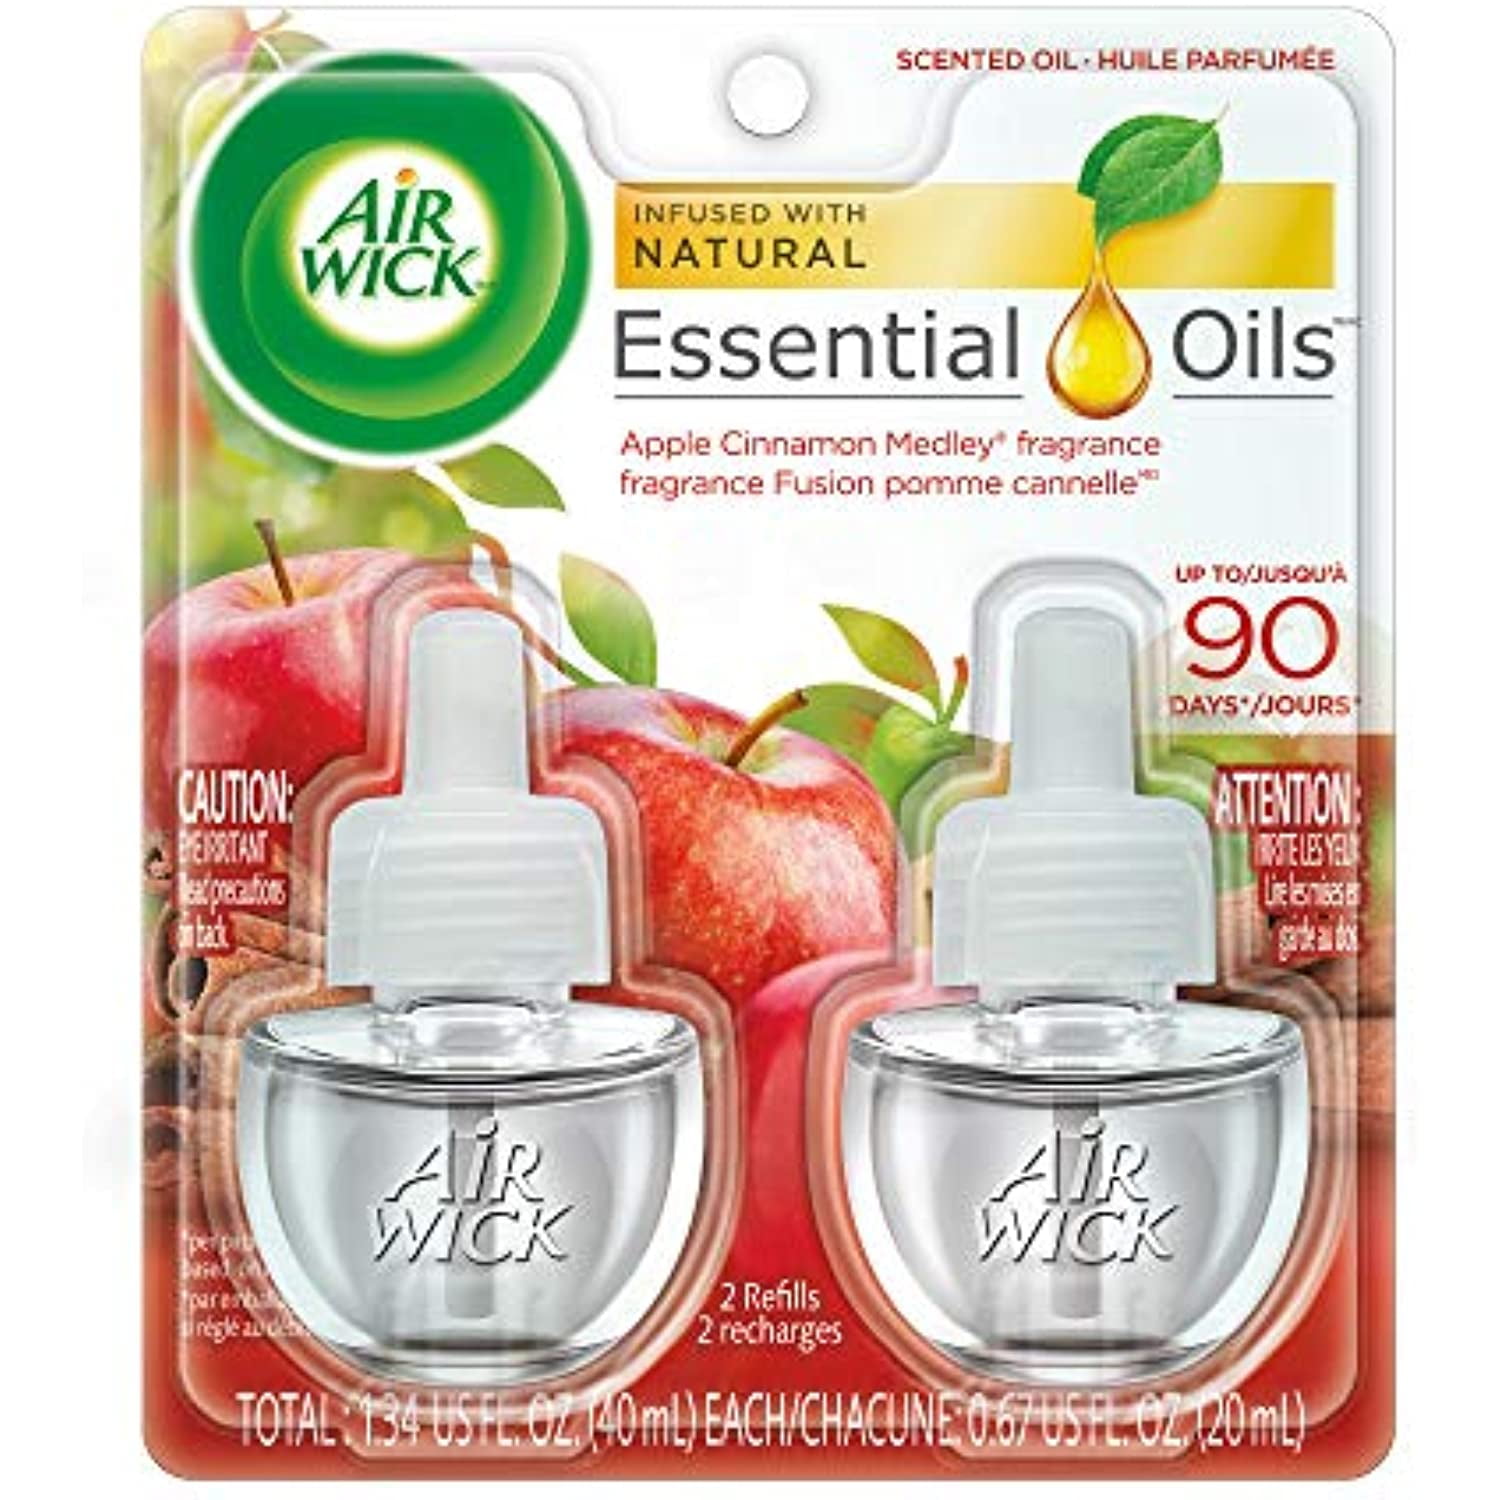 Air Wick Scented Oils Apple Cinnamon Medley Twin Refill .67oz : Cleaning  fast delivery by App or Online